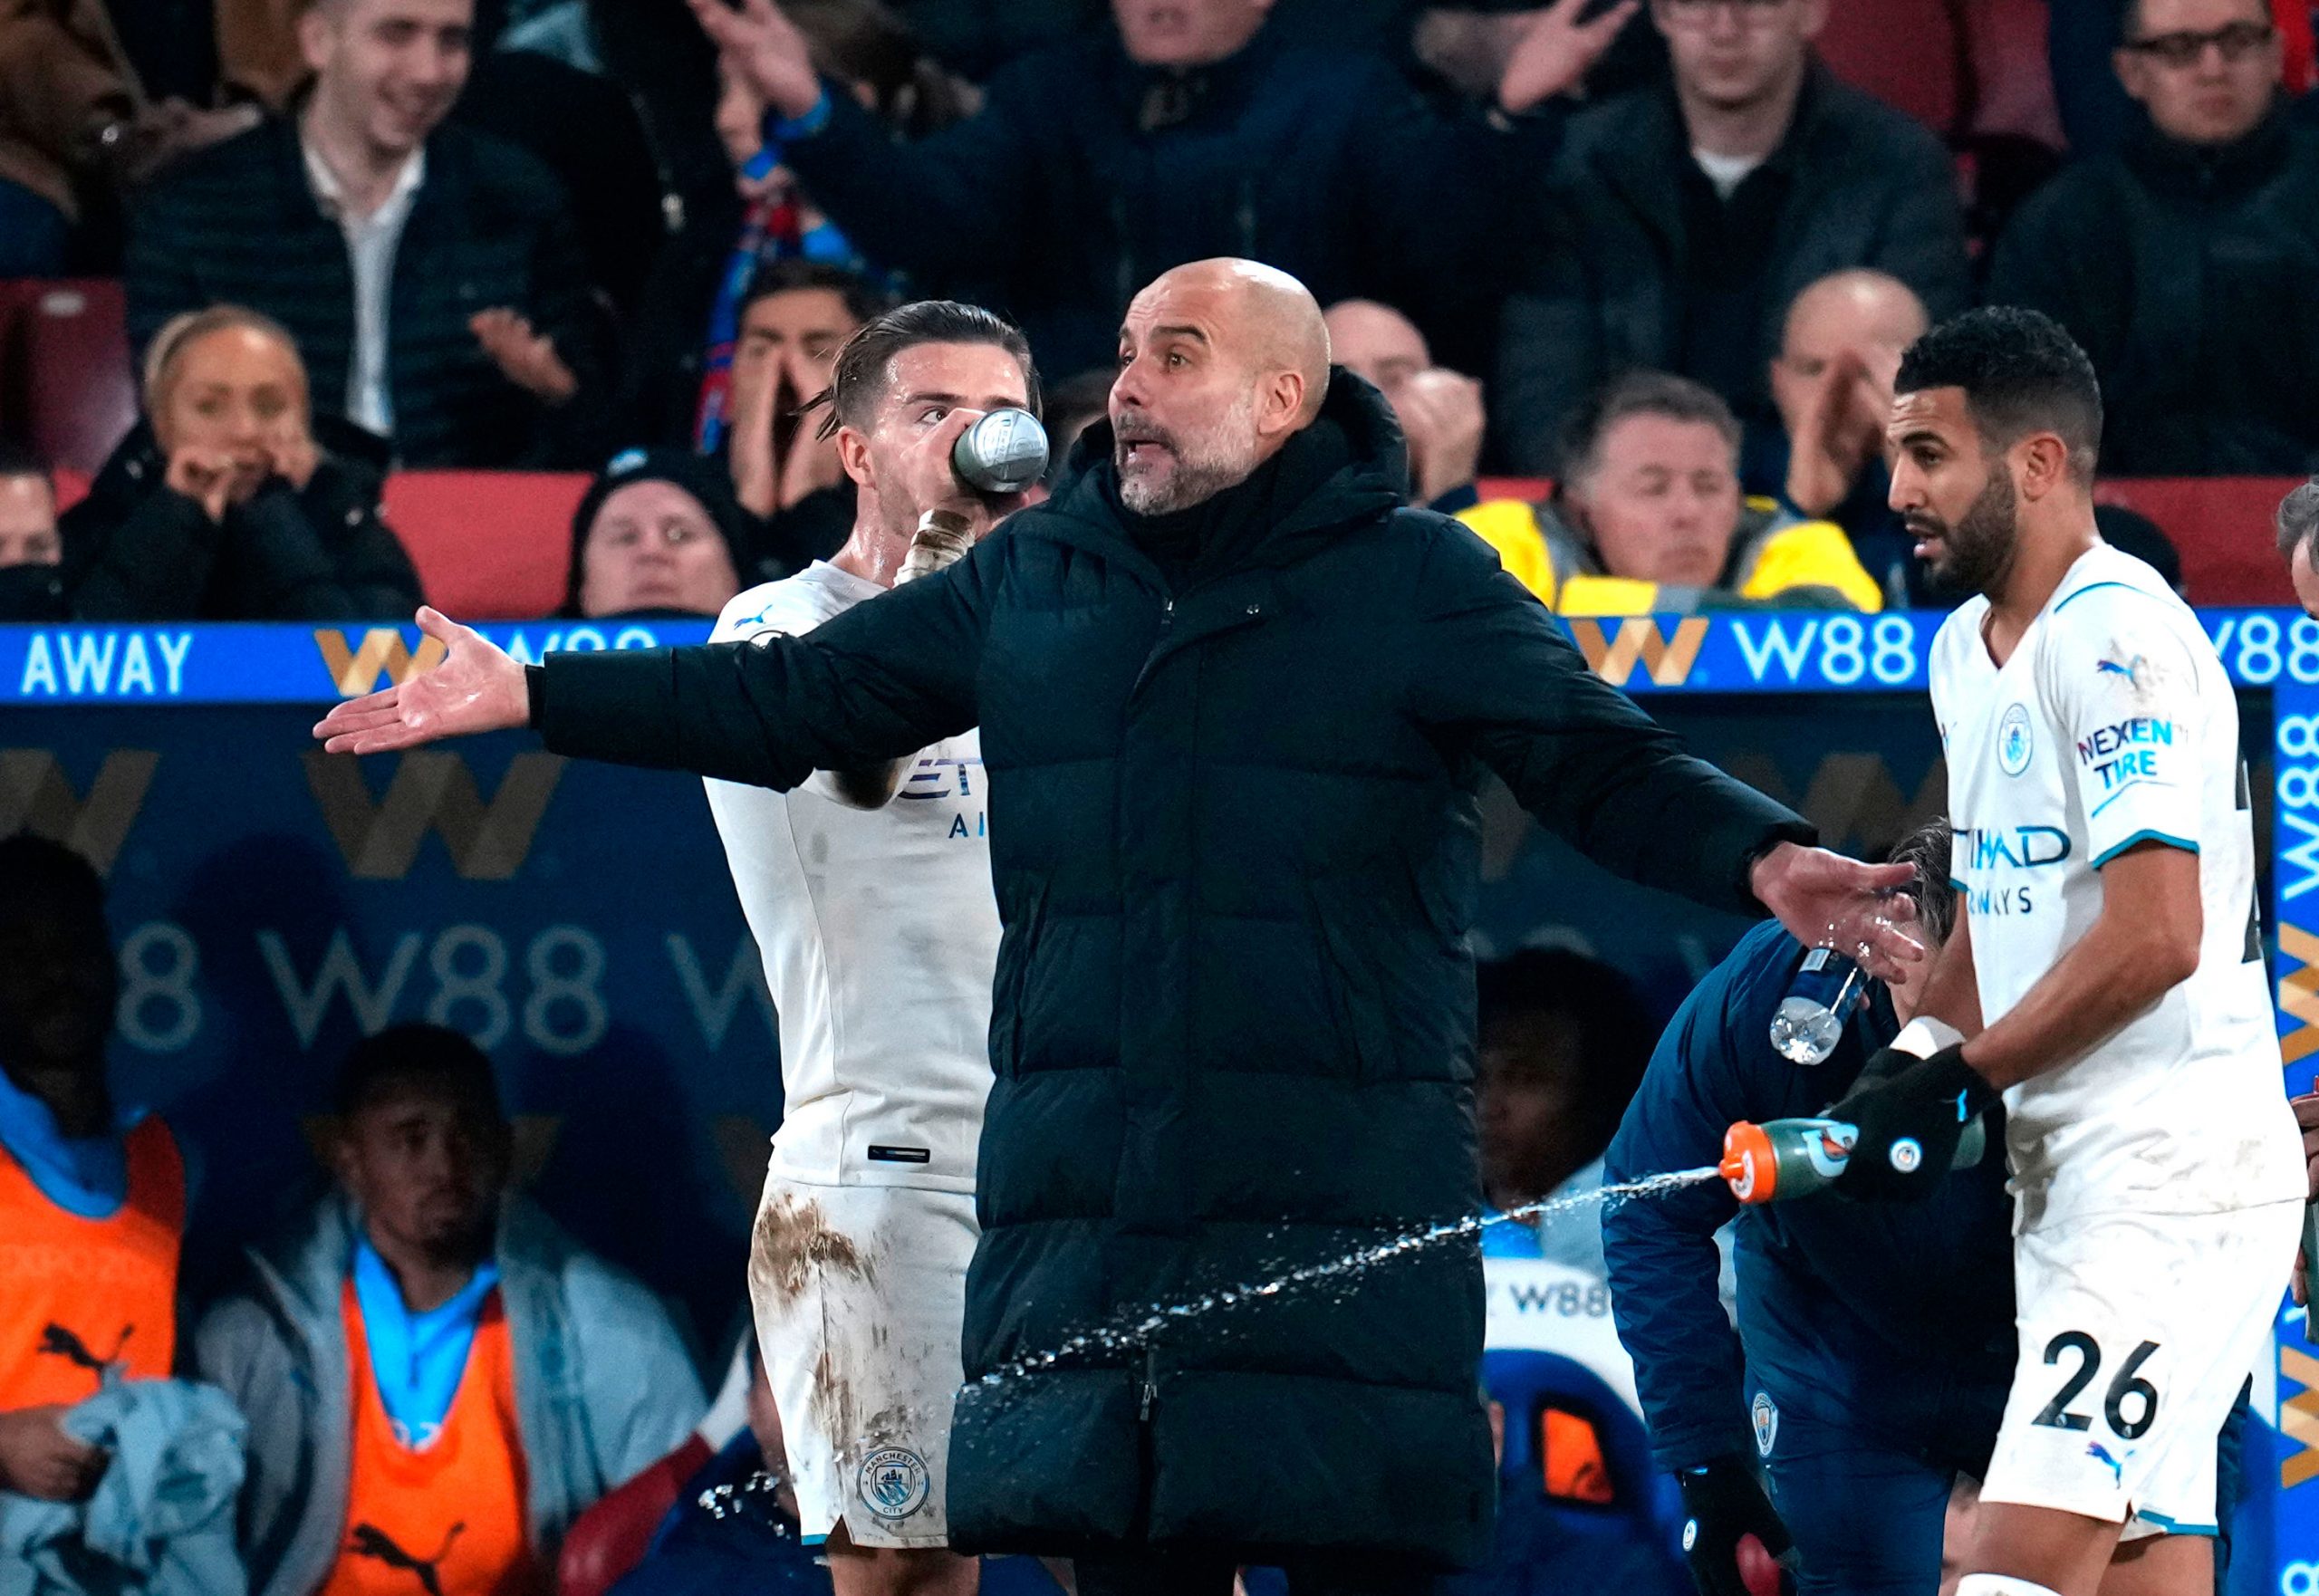 Watch Pep Guardiola kick bottle at Leeds United bench after Manchester City’s missed chance, runs to apologize